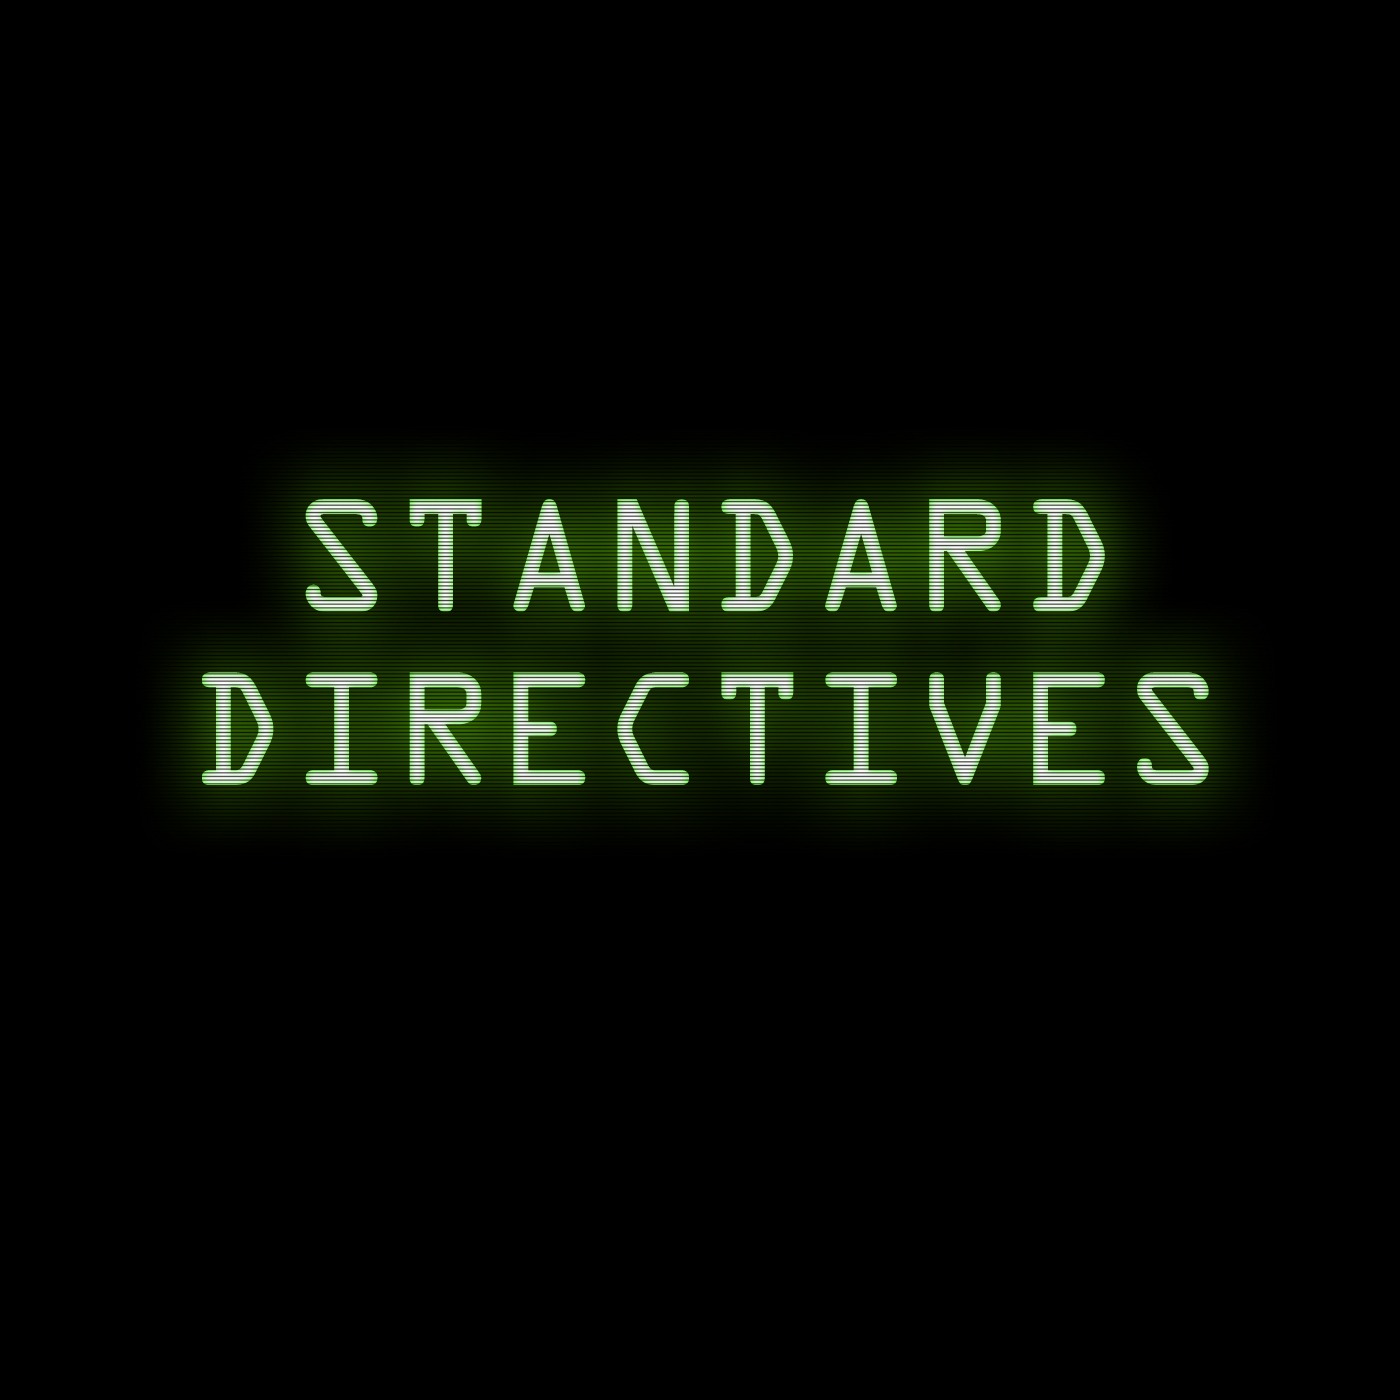 Standard Directive 009: You Should Be Just A Little Paranoid